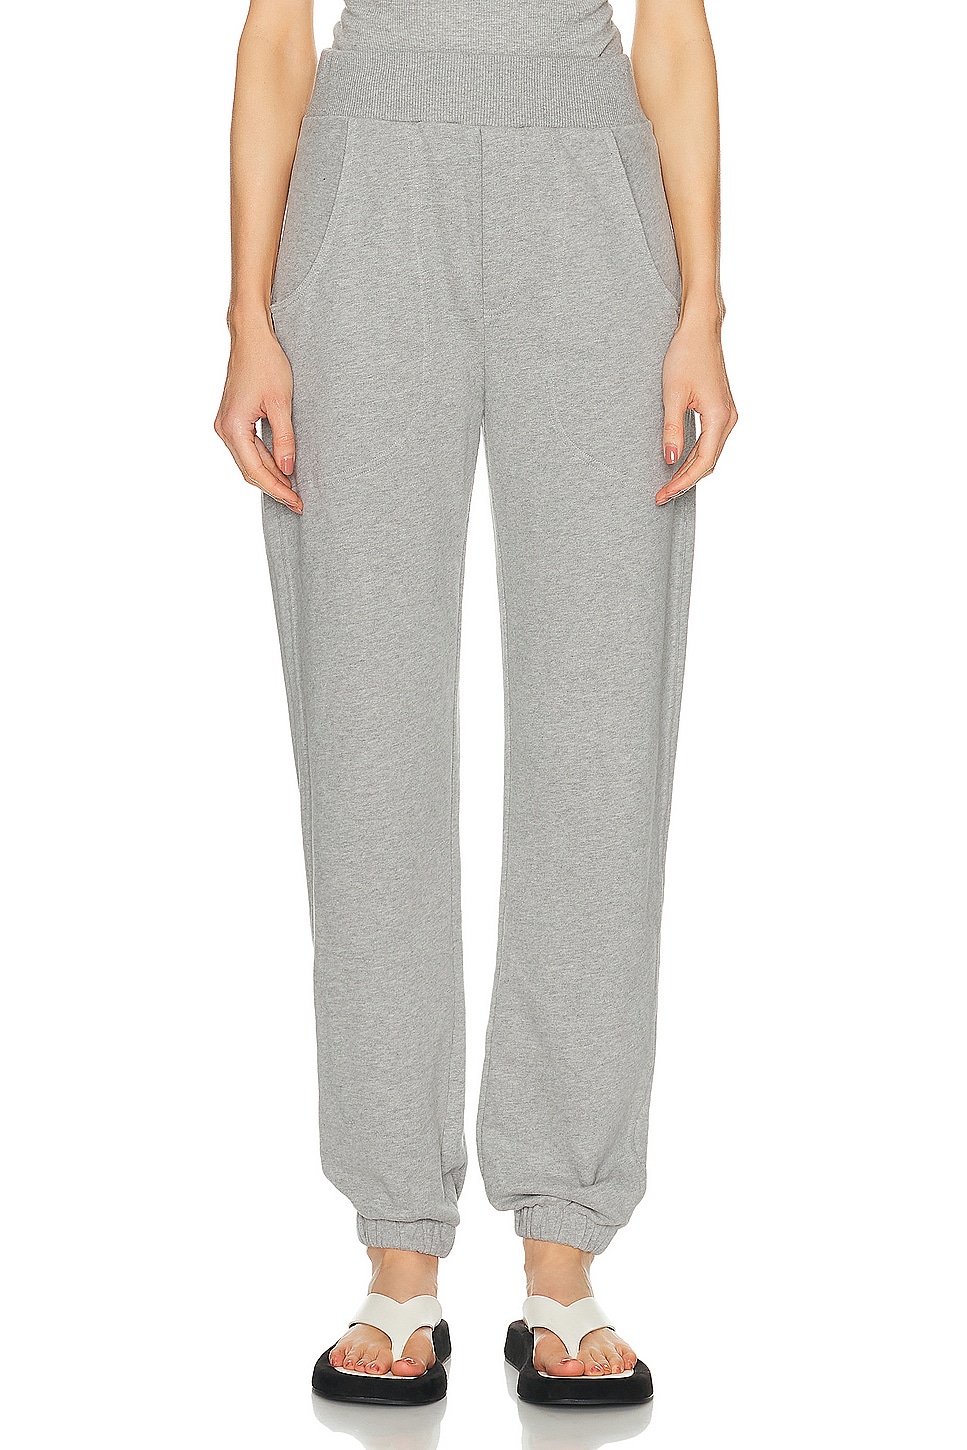 Image 1 of GRLFRND The Curve Sweatpant in Heather Grey